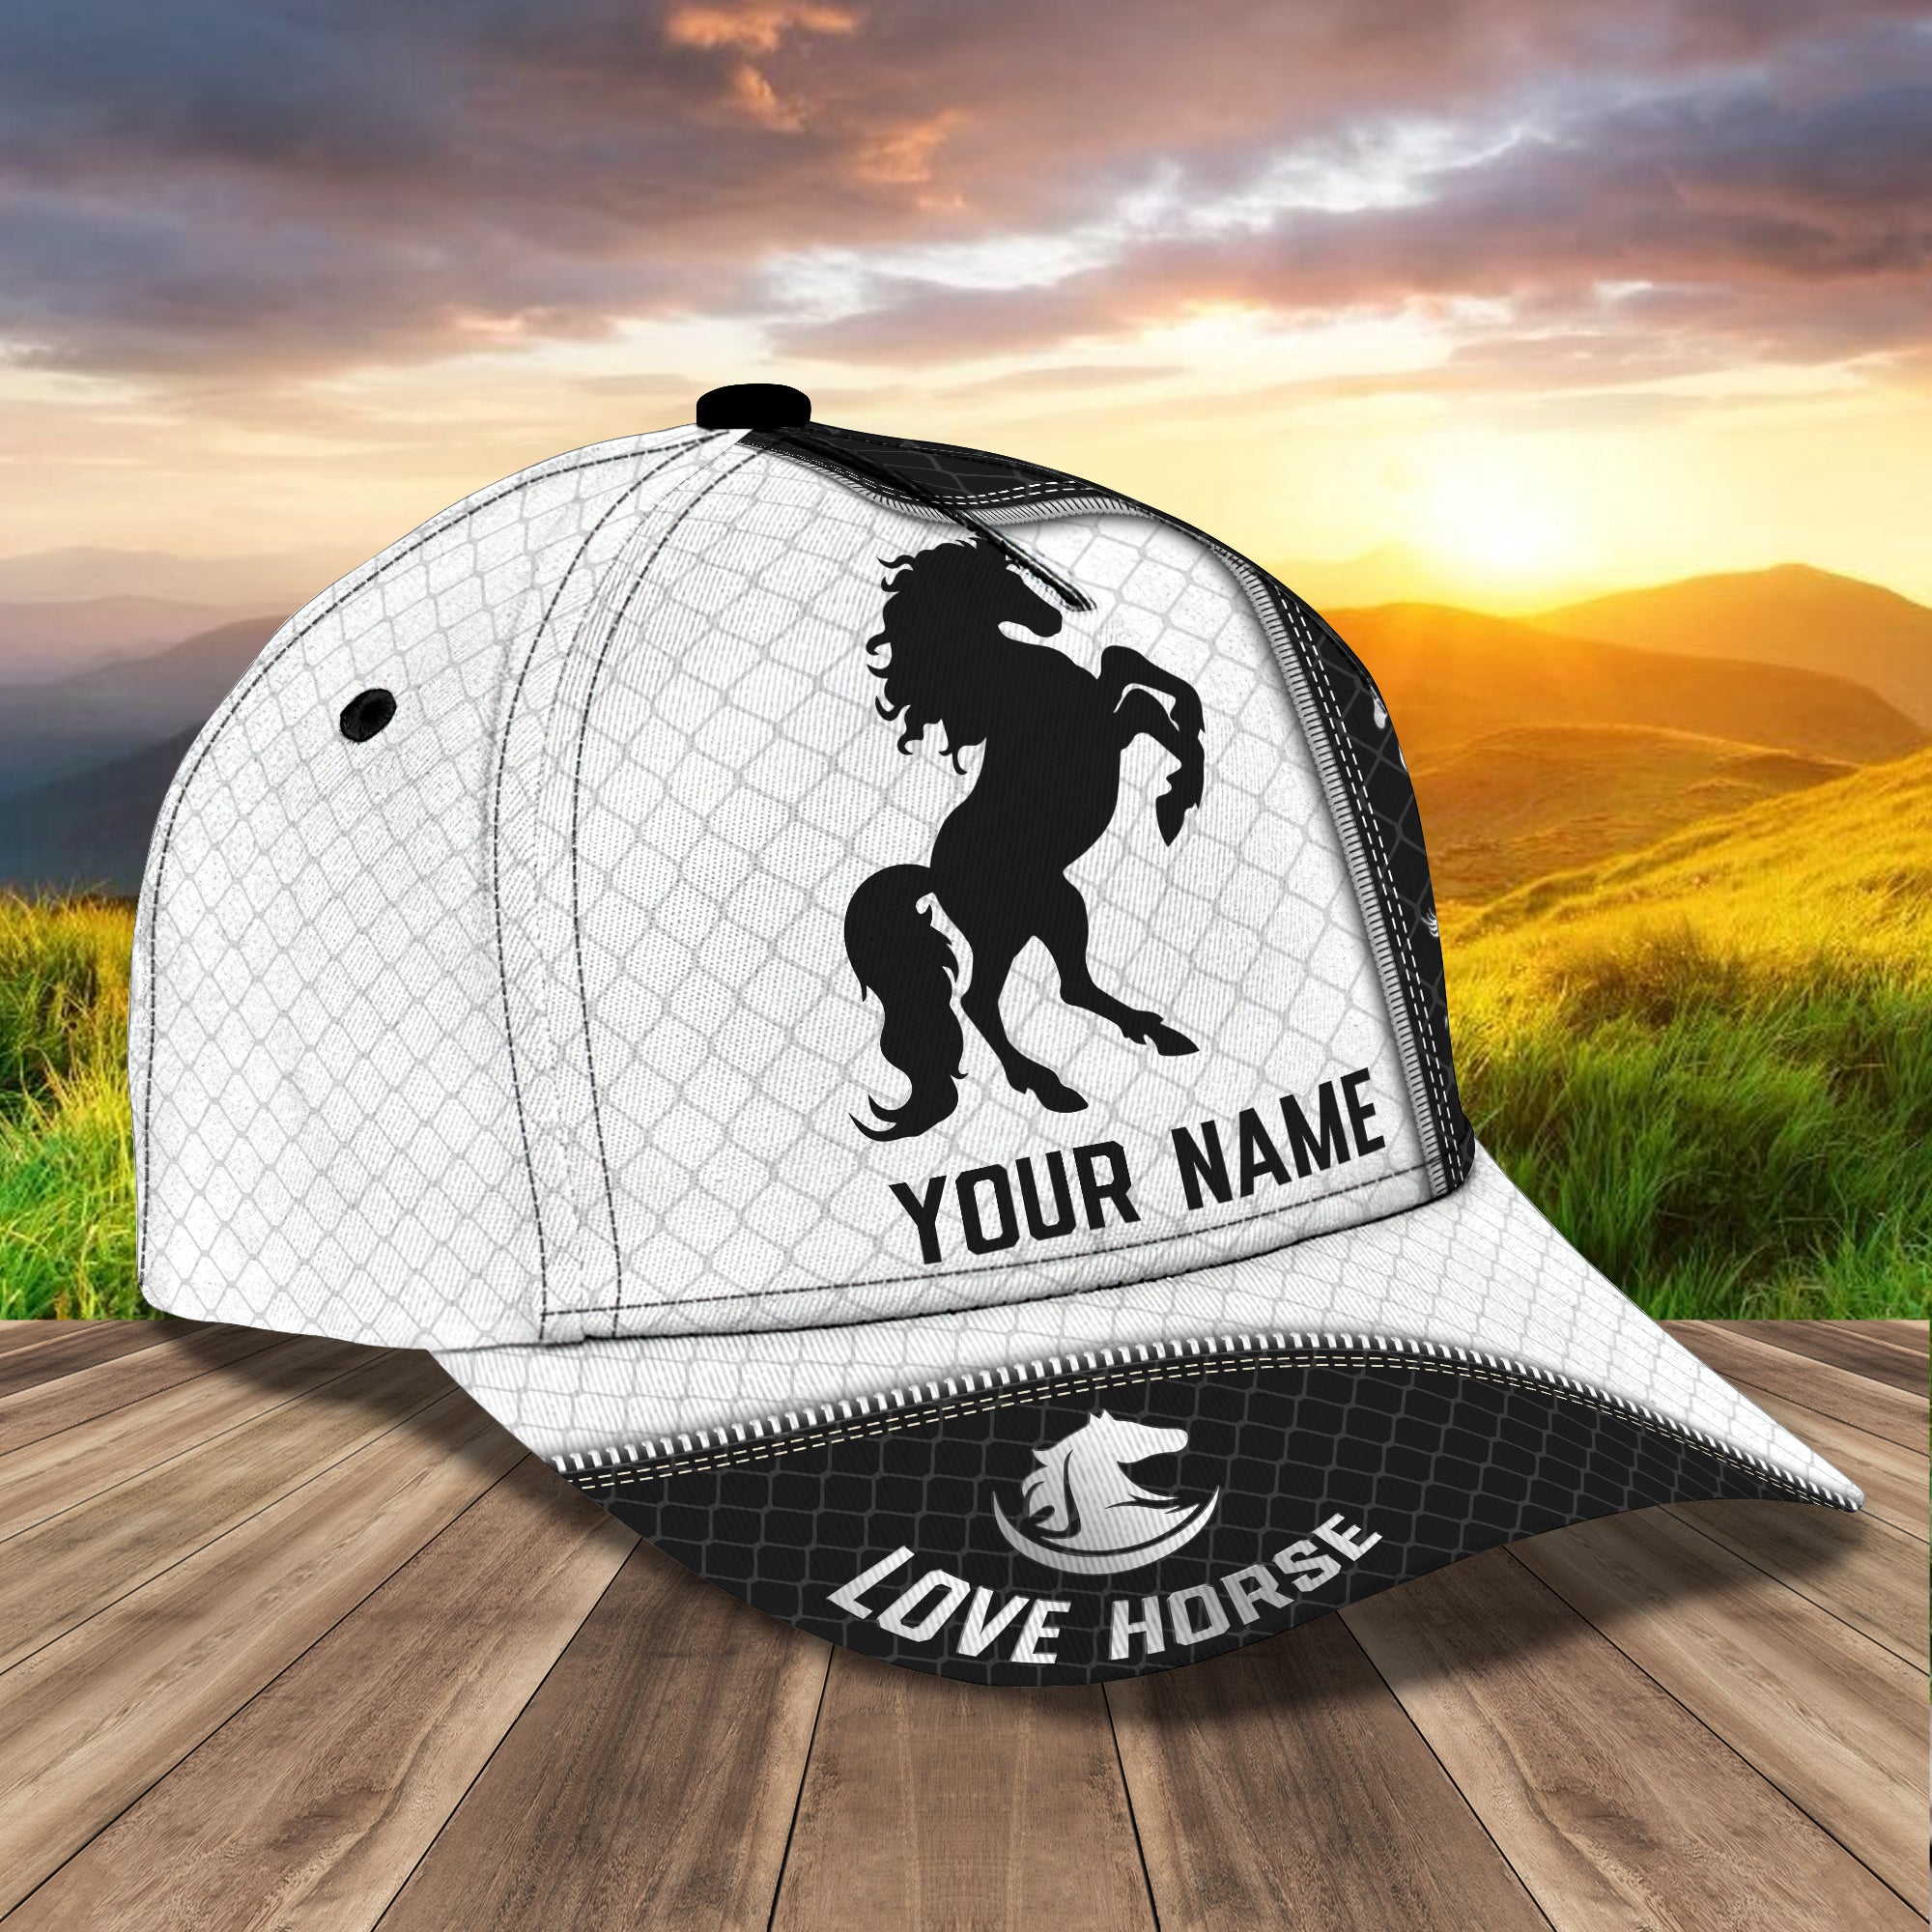 Horse - Personalized Name Cap - DAT93-003